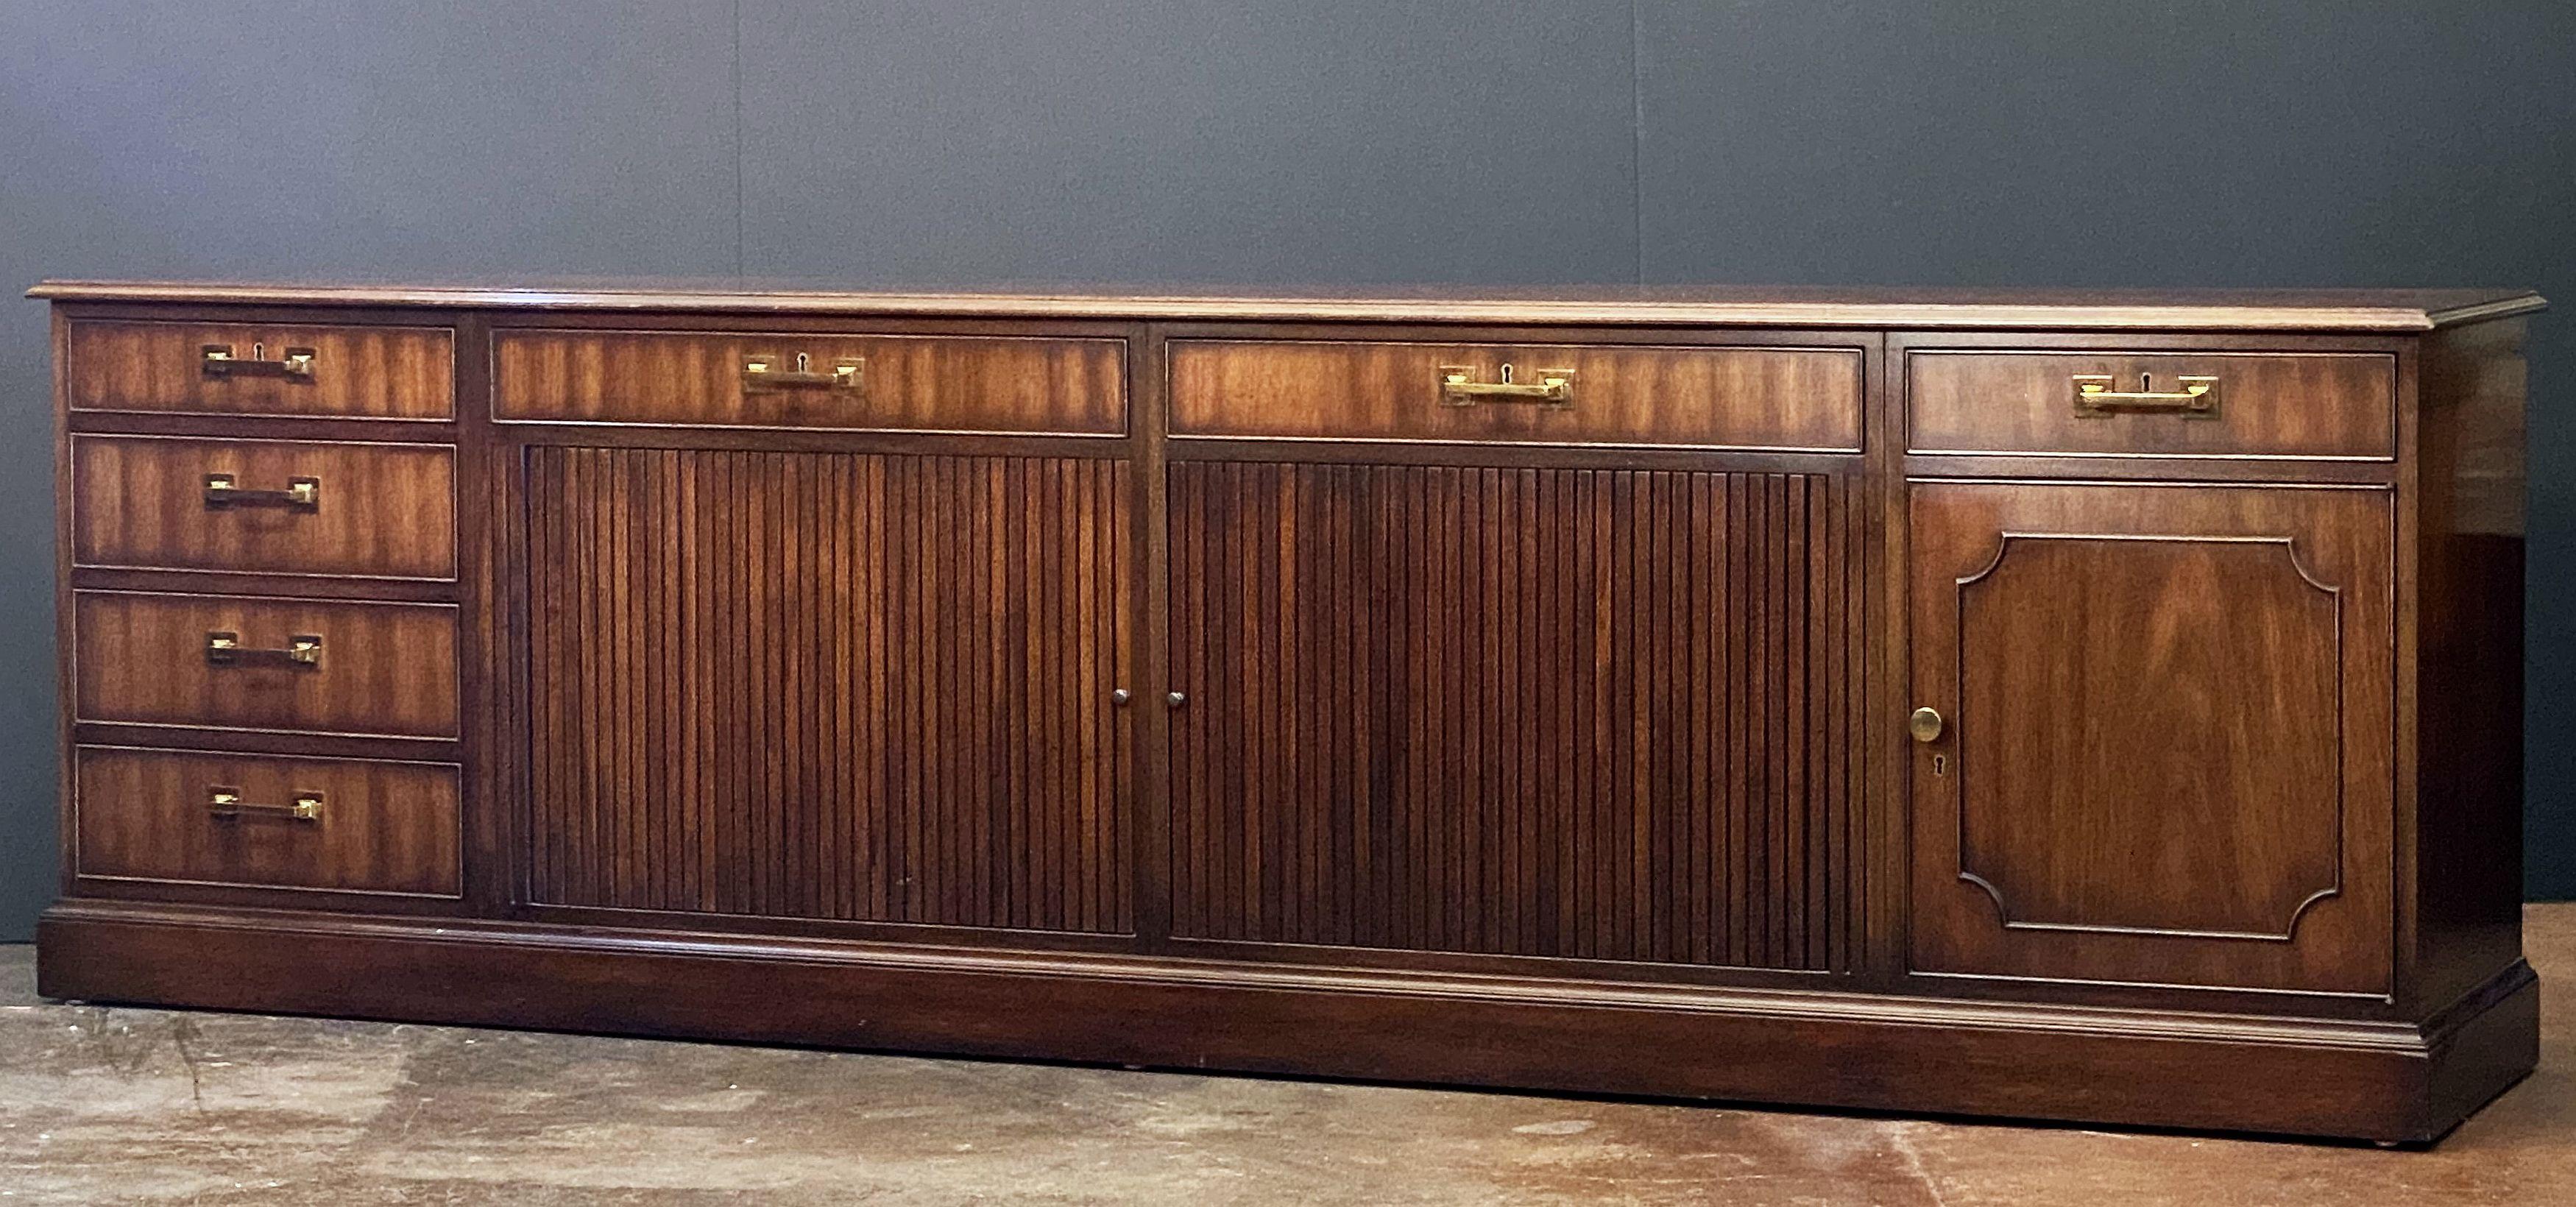 A fine large executive console table or storage cabinet, featuring a moulded wood top over a frieze of drawers and cabinets, with sliding tambour doors in center, by Kittinger.

With metal Kittinger name plaque in drawer.

Dimensions: H 30 1/2